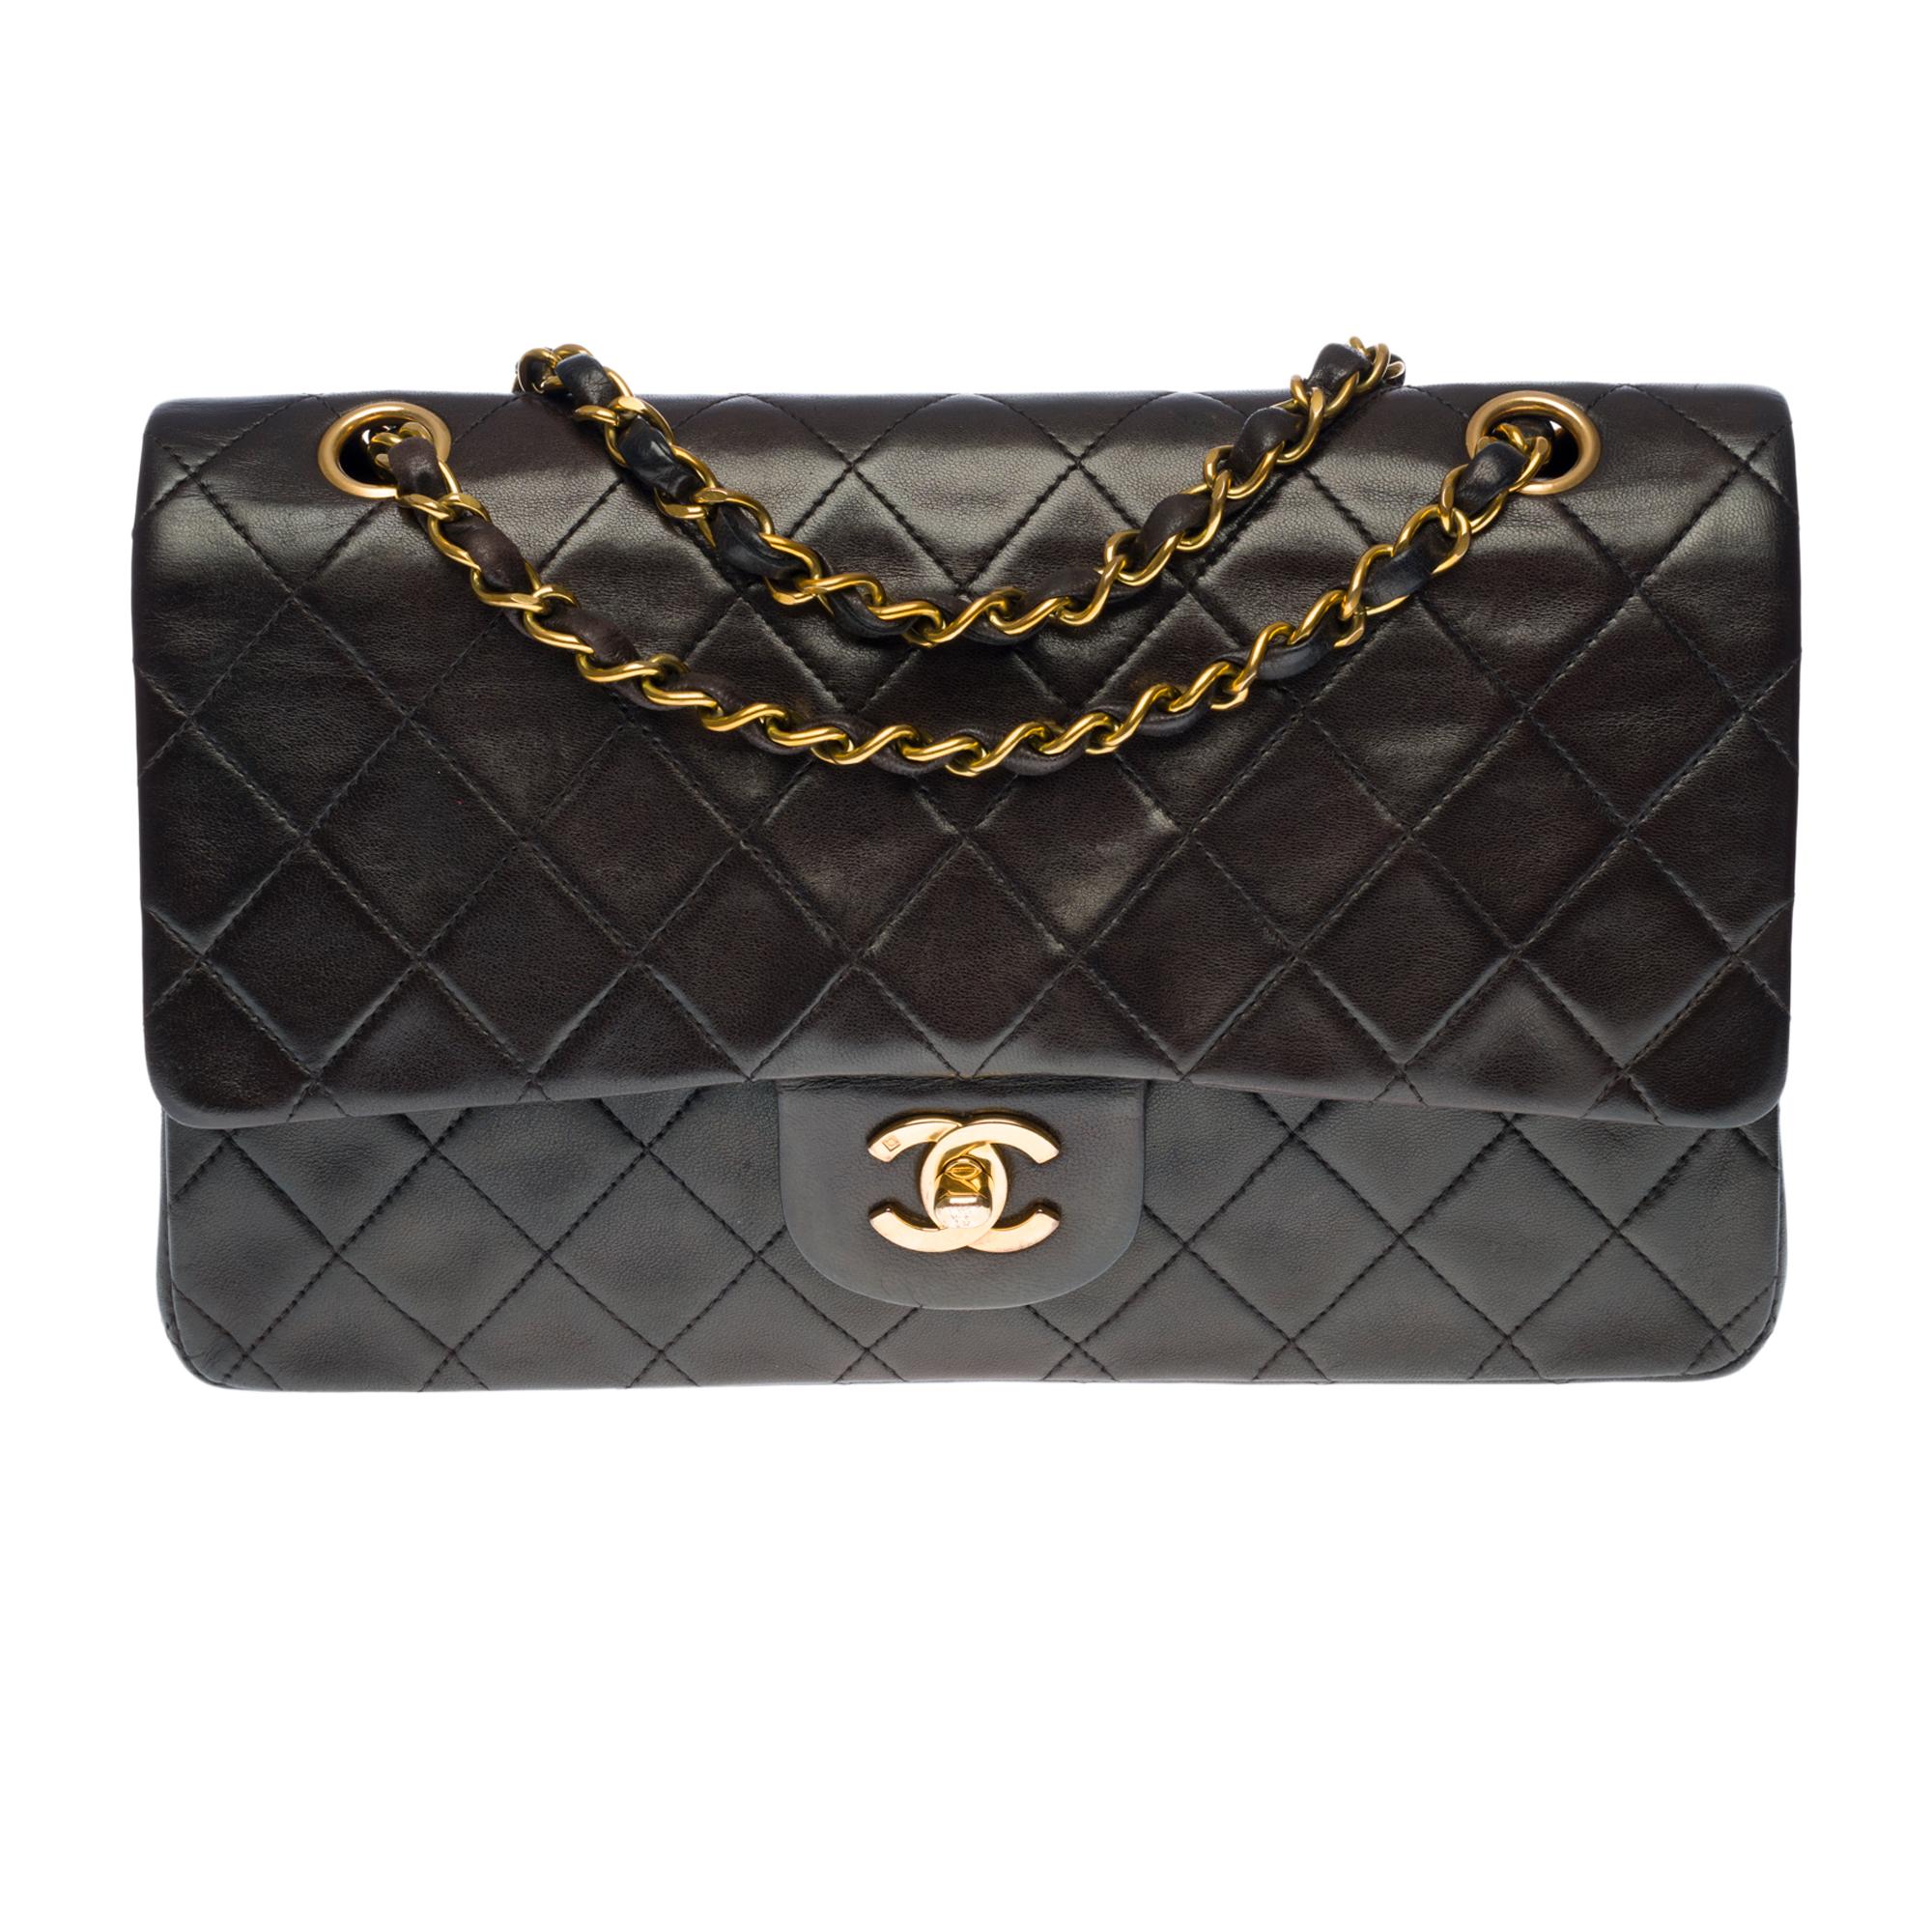 Chanel Timeless double flap Medium Shoulder bag in brown quilted leather, GHW